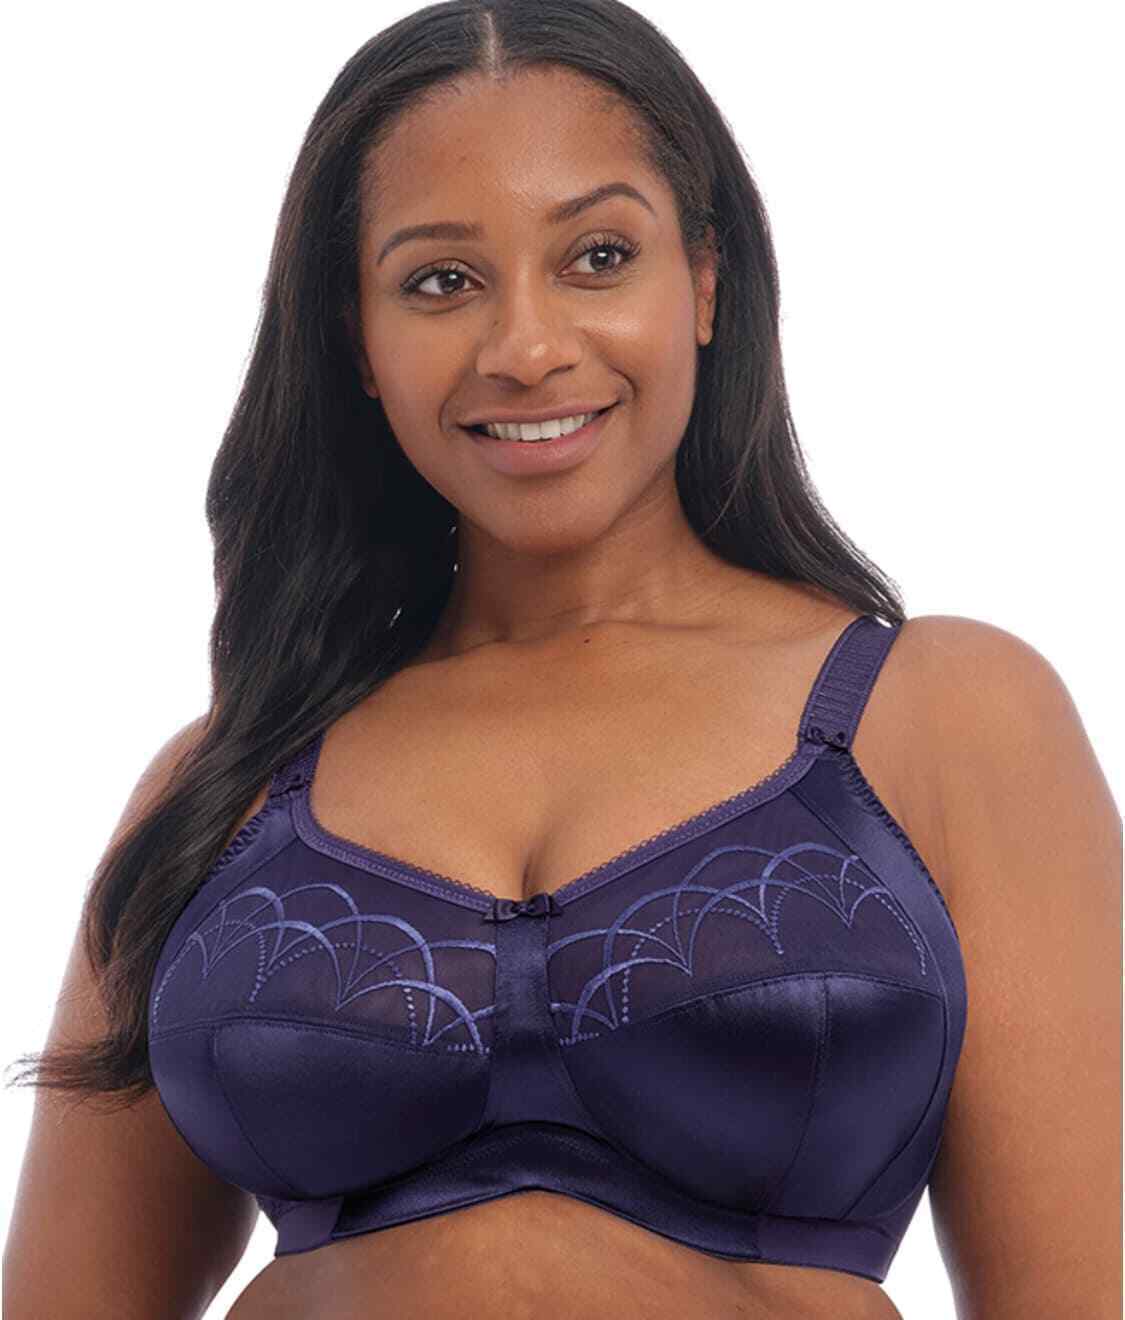 Elomi Women's Cate Side Support Wire-free Bra - El4033 48e Rosewood : Target